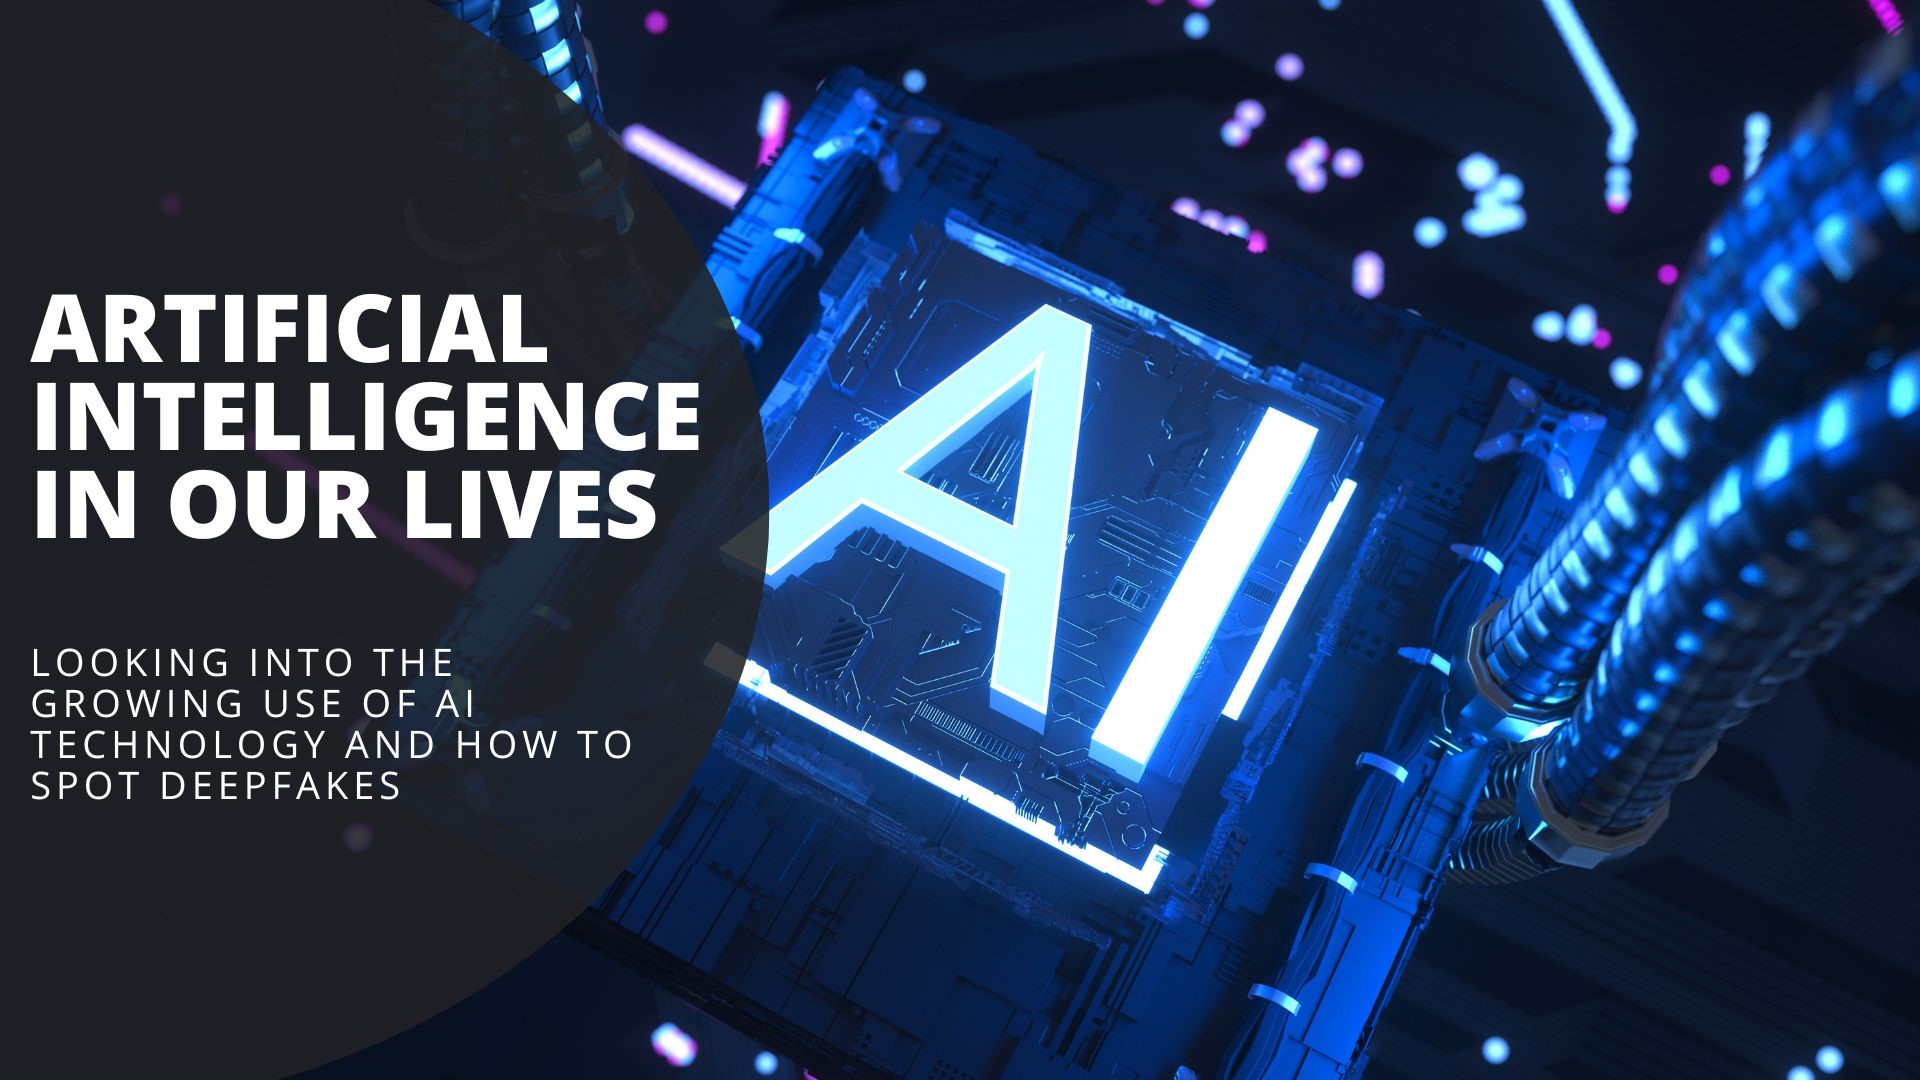 Looking into the growing use of AI in our lives and how to spot deepfakes and other false images. Plus more on the popular ChatGPT and other AI tech.